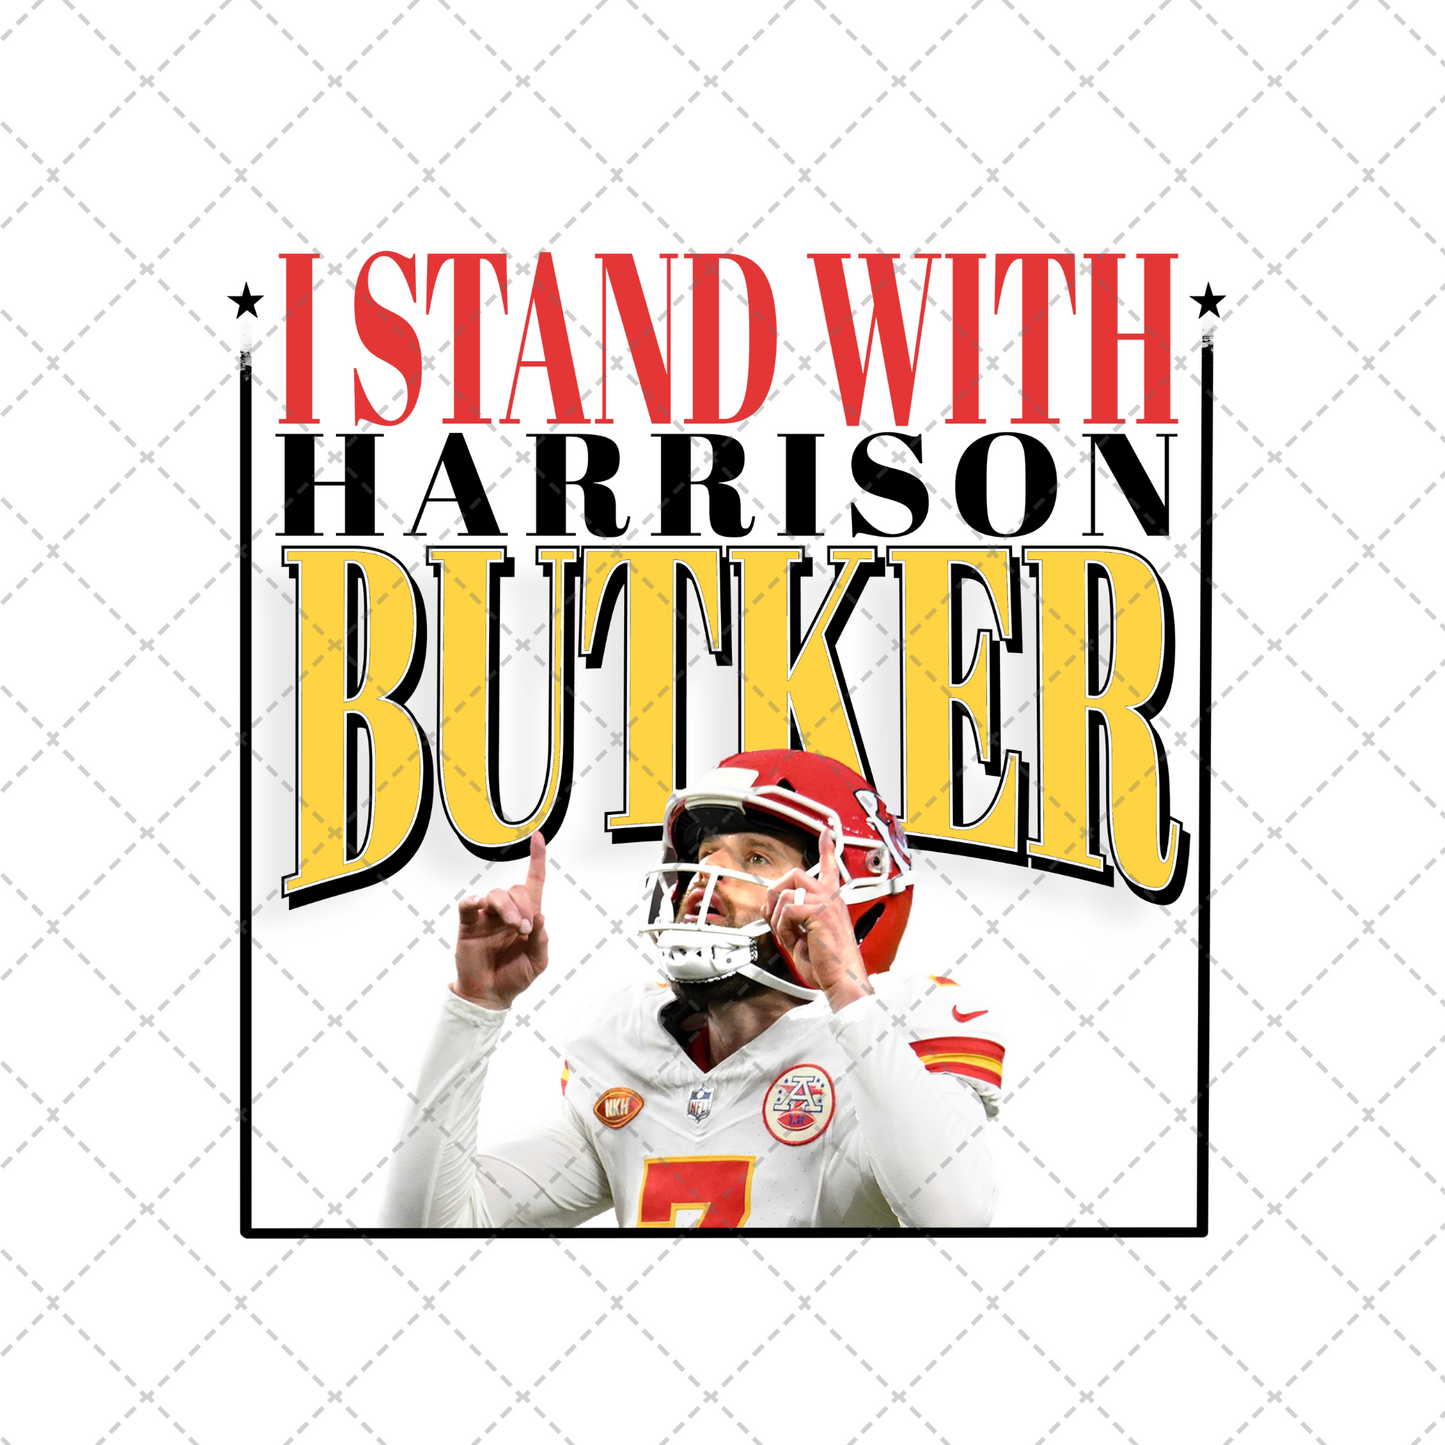 I Stand With Butker Transfer